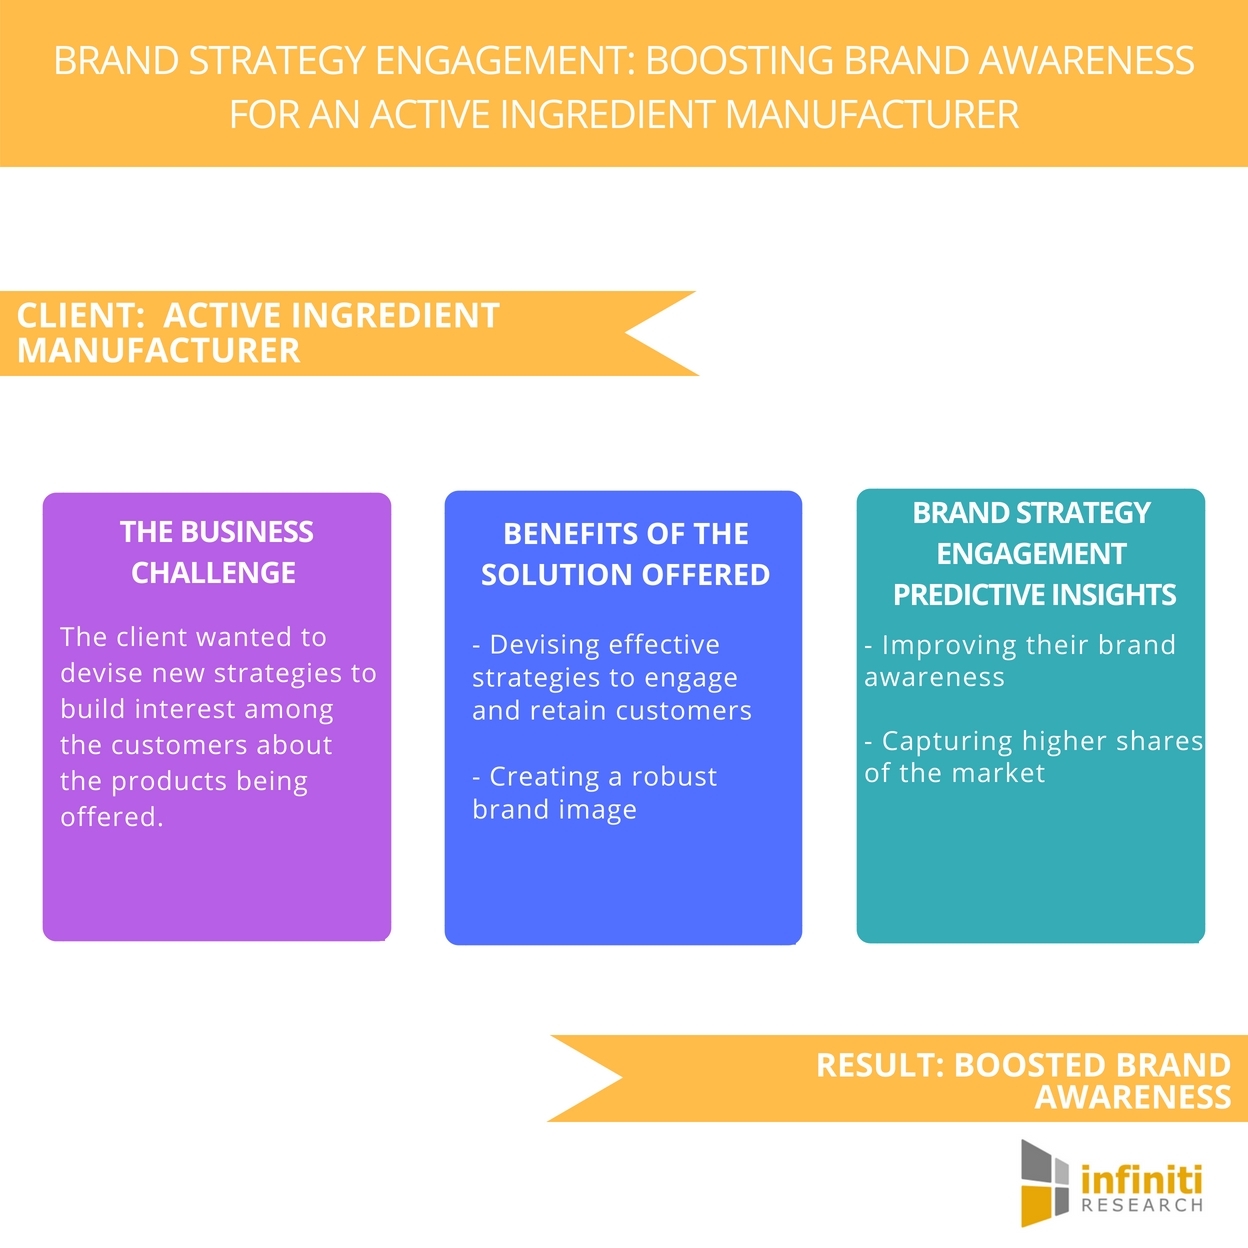 Boosting Brand Awareness A Brand Strategy Engagement Study For An Active Ingredient Manufacturer Infiniti Research Business Wire